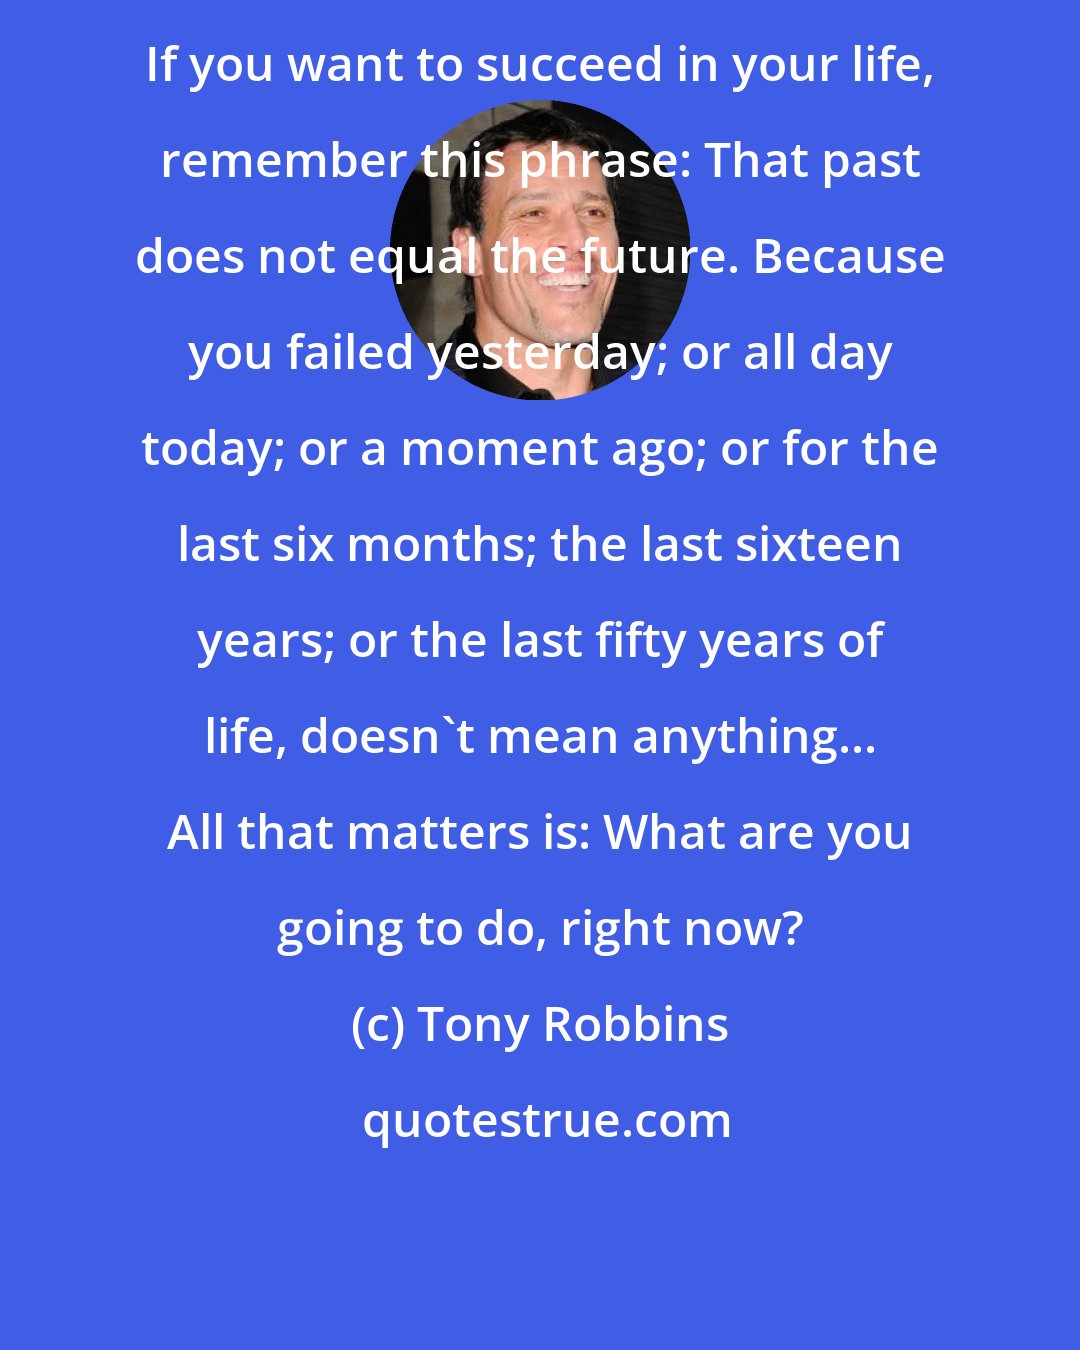 Tony Robbins: If you want to succeed in your life, remember this phrase: That past does not equal the future. Because you failed yesterday; or all day today; or a moment ago; or for the last six months; the last sixteen years; or the last fifty years of life, doesn't mean anything... All that matters is: What are you going to do, right now?